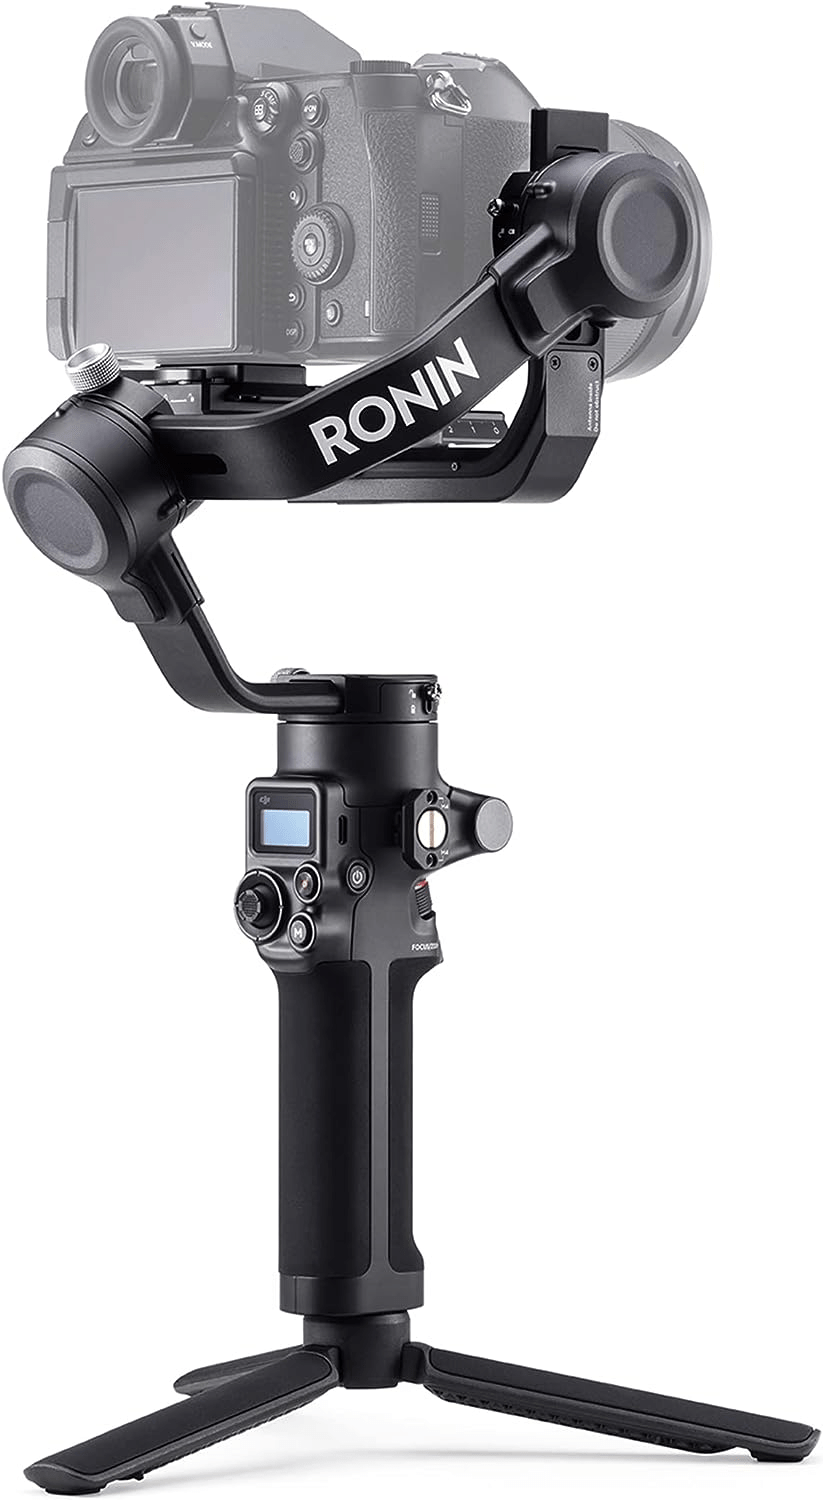 The DJI RS3 is the best OnlyFans gimbal for professional cameras.